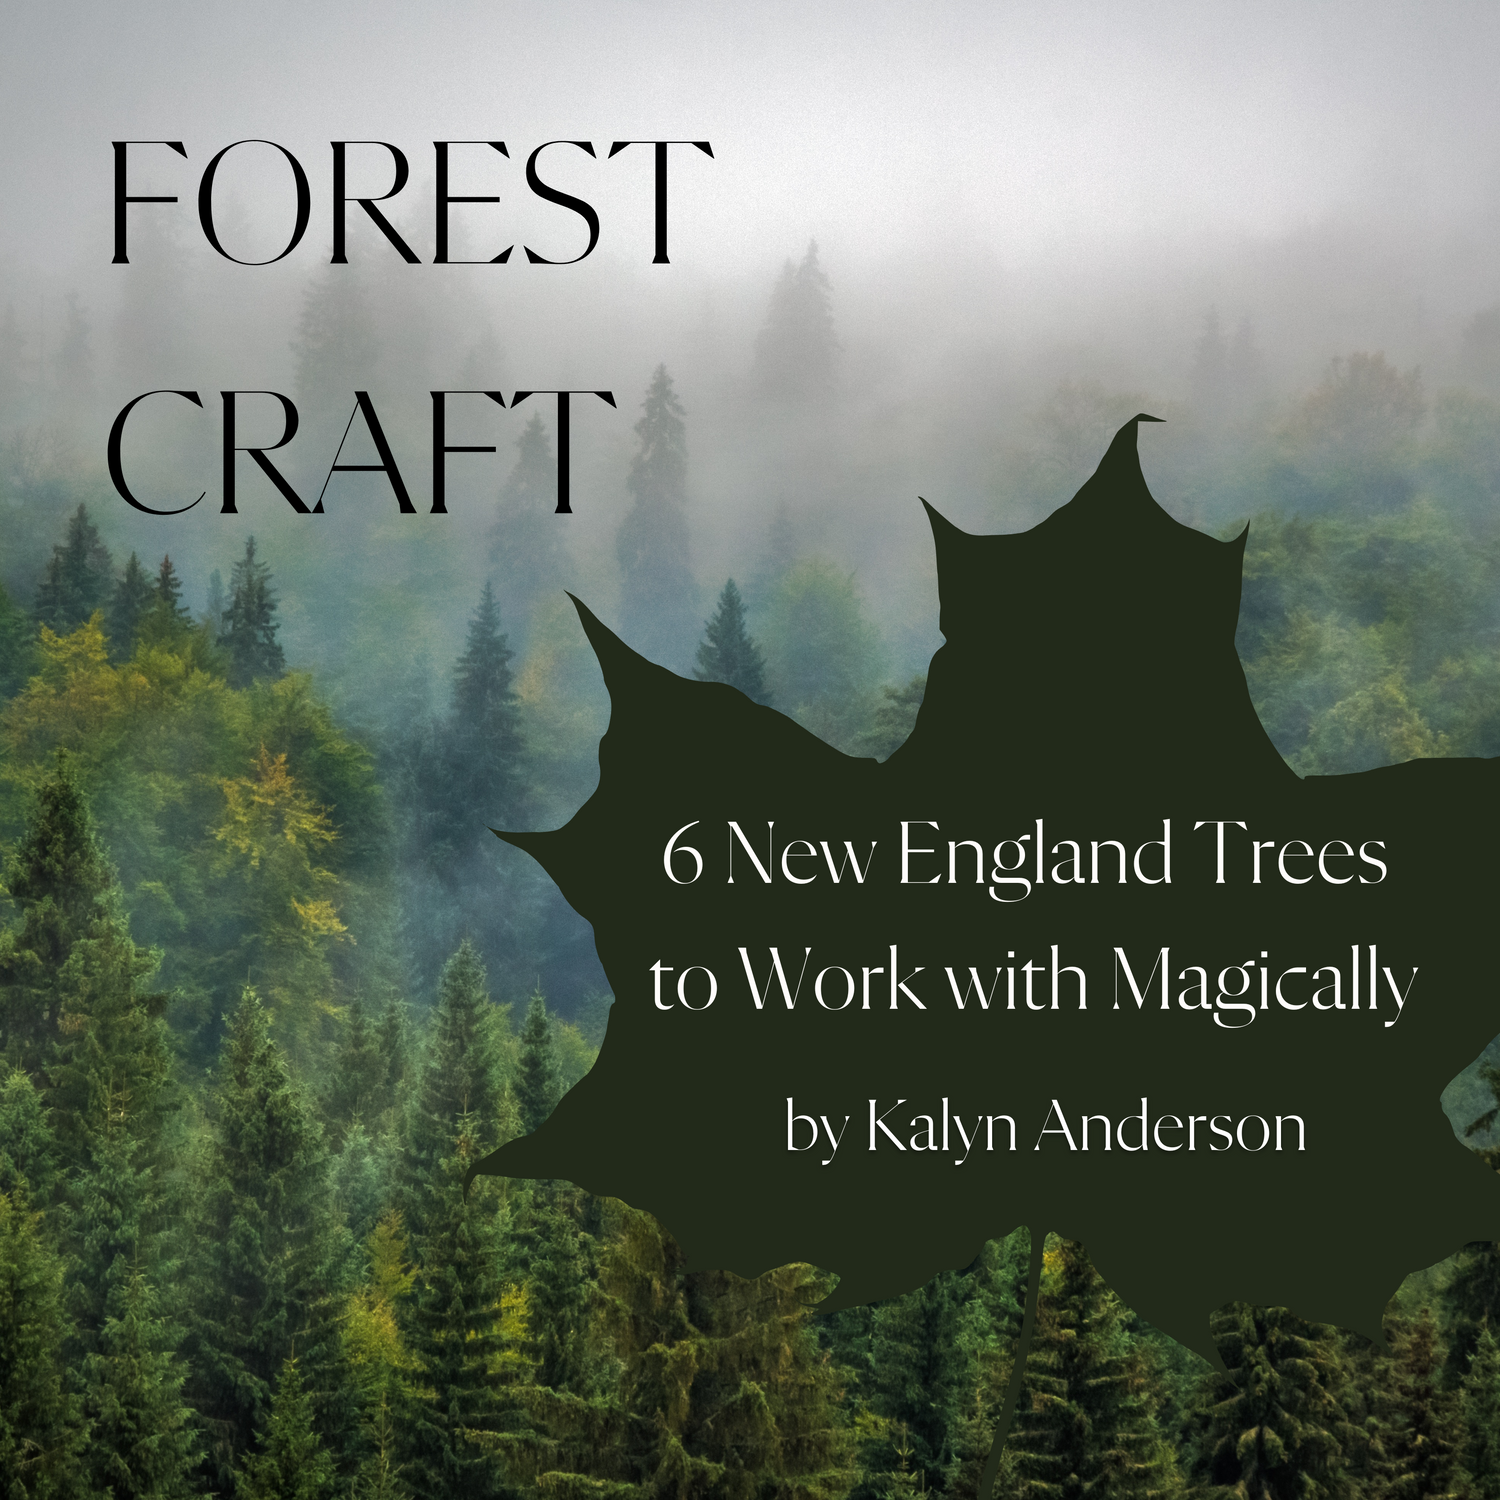 Forest Craft: 6 New England Trees to Work With Magically.